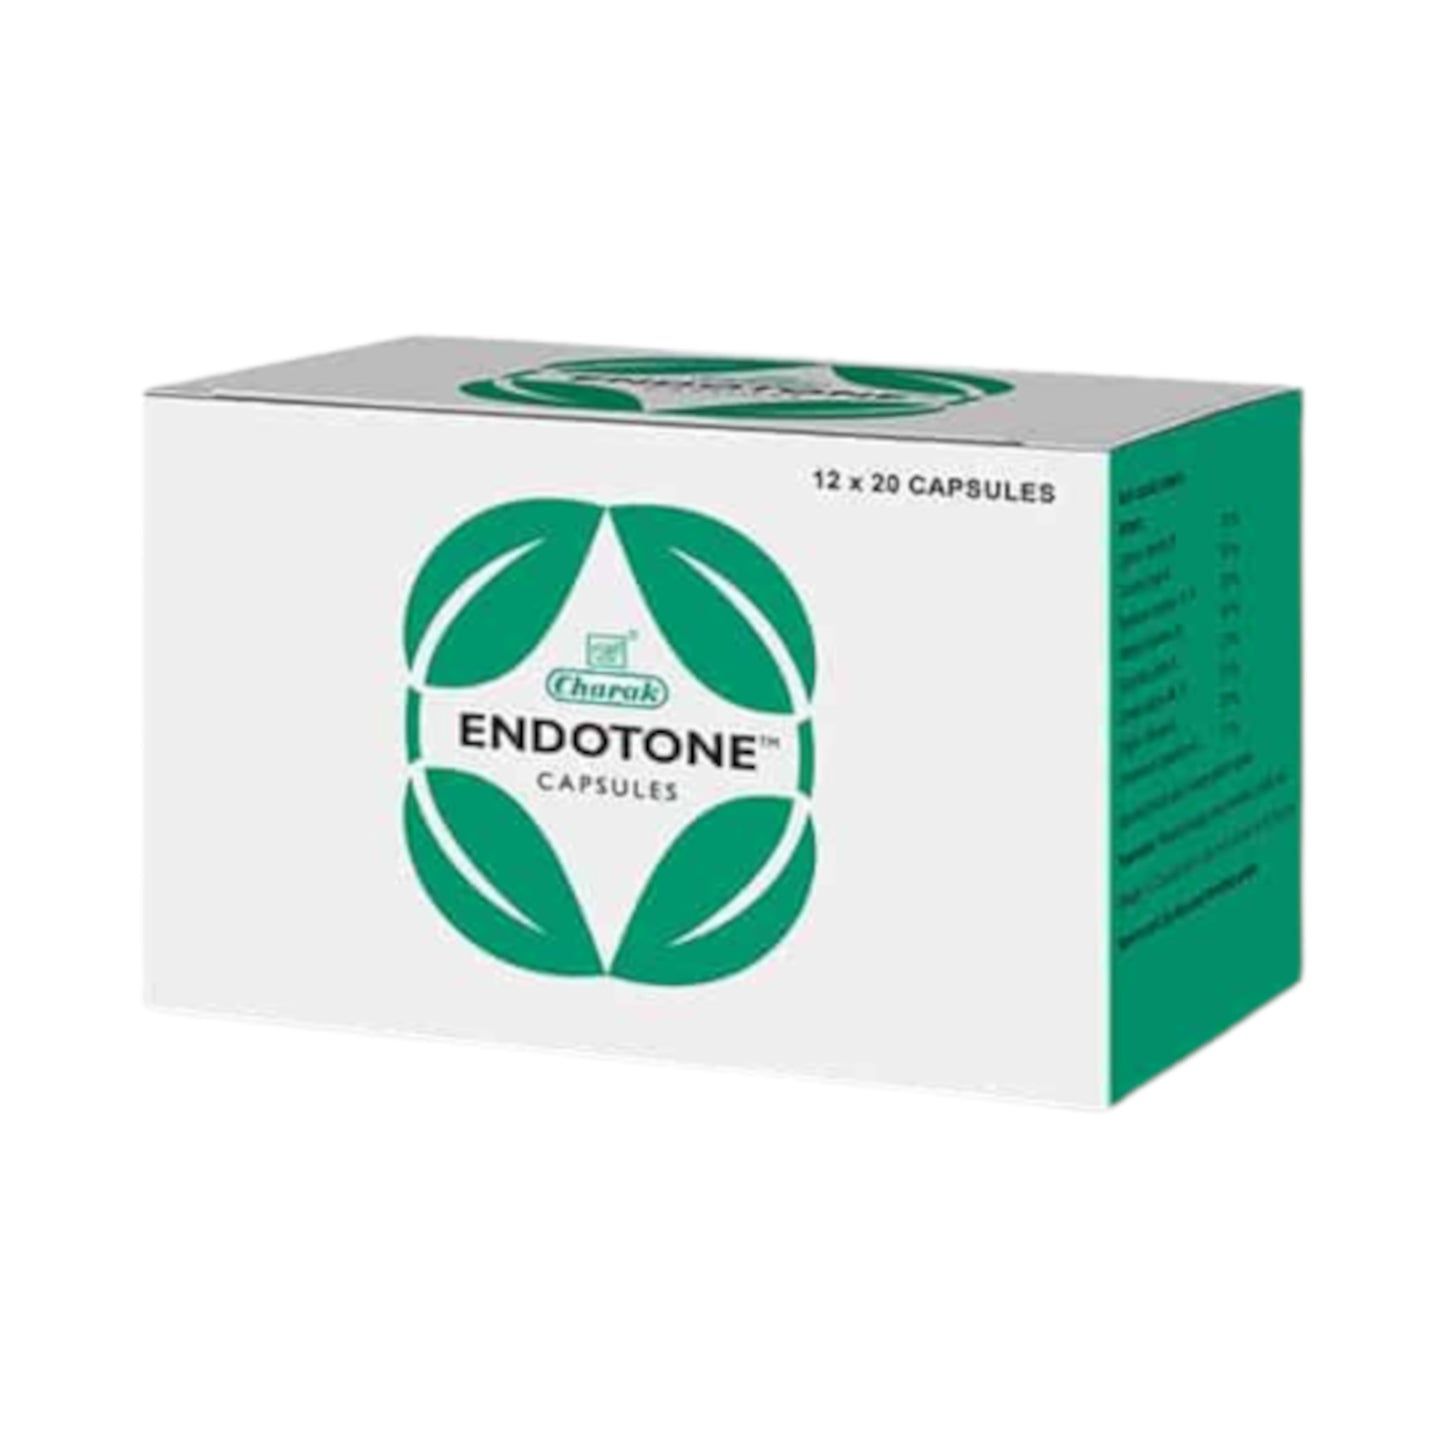 Image of Charak - Endotone 20 Capsules: Herbal remedy for endometriosis, relieving pain, and promoting fertility.